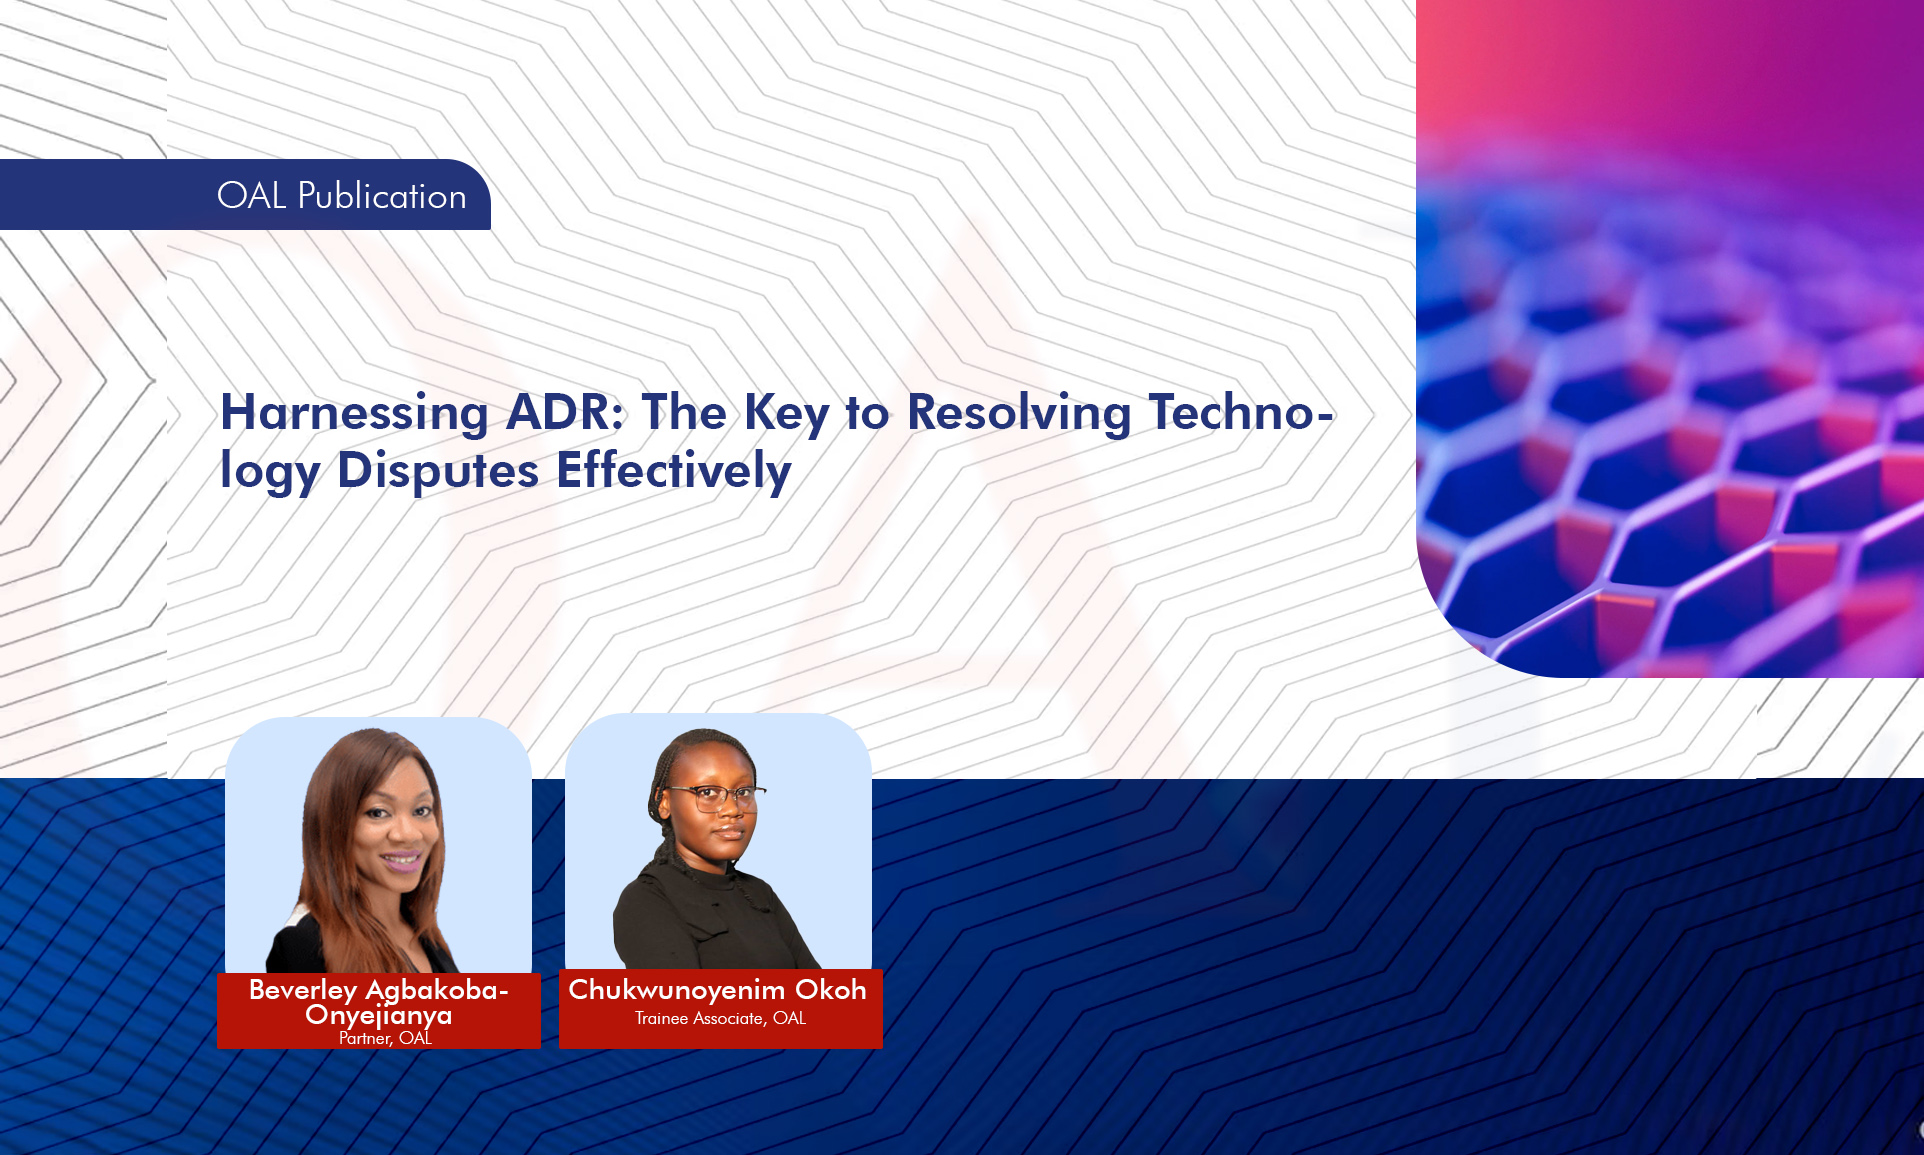 Harnessing ADR: The Key to Resolving Technology Disputes Effectively.